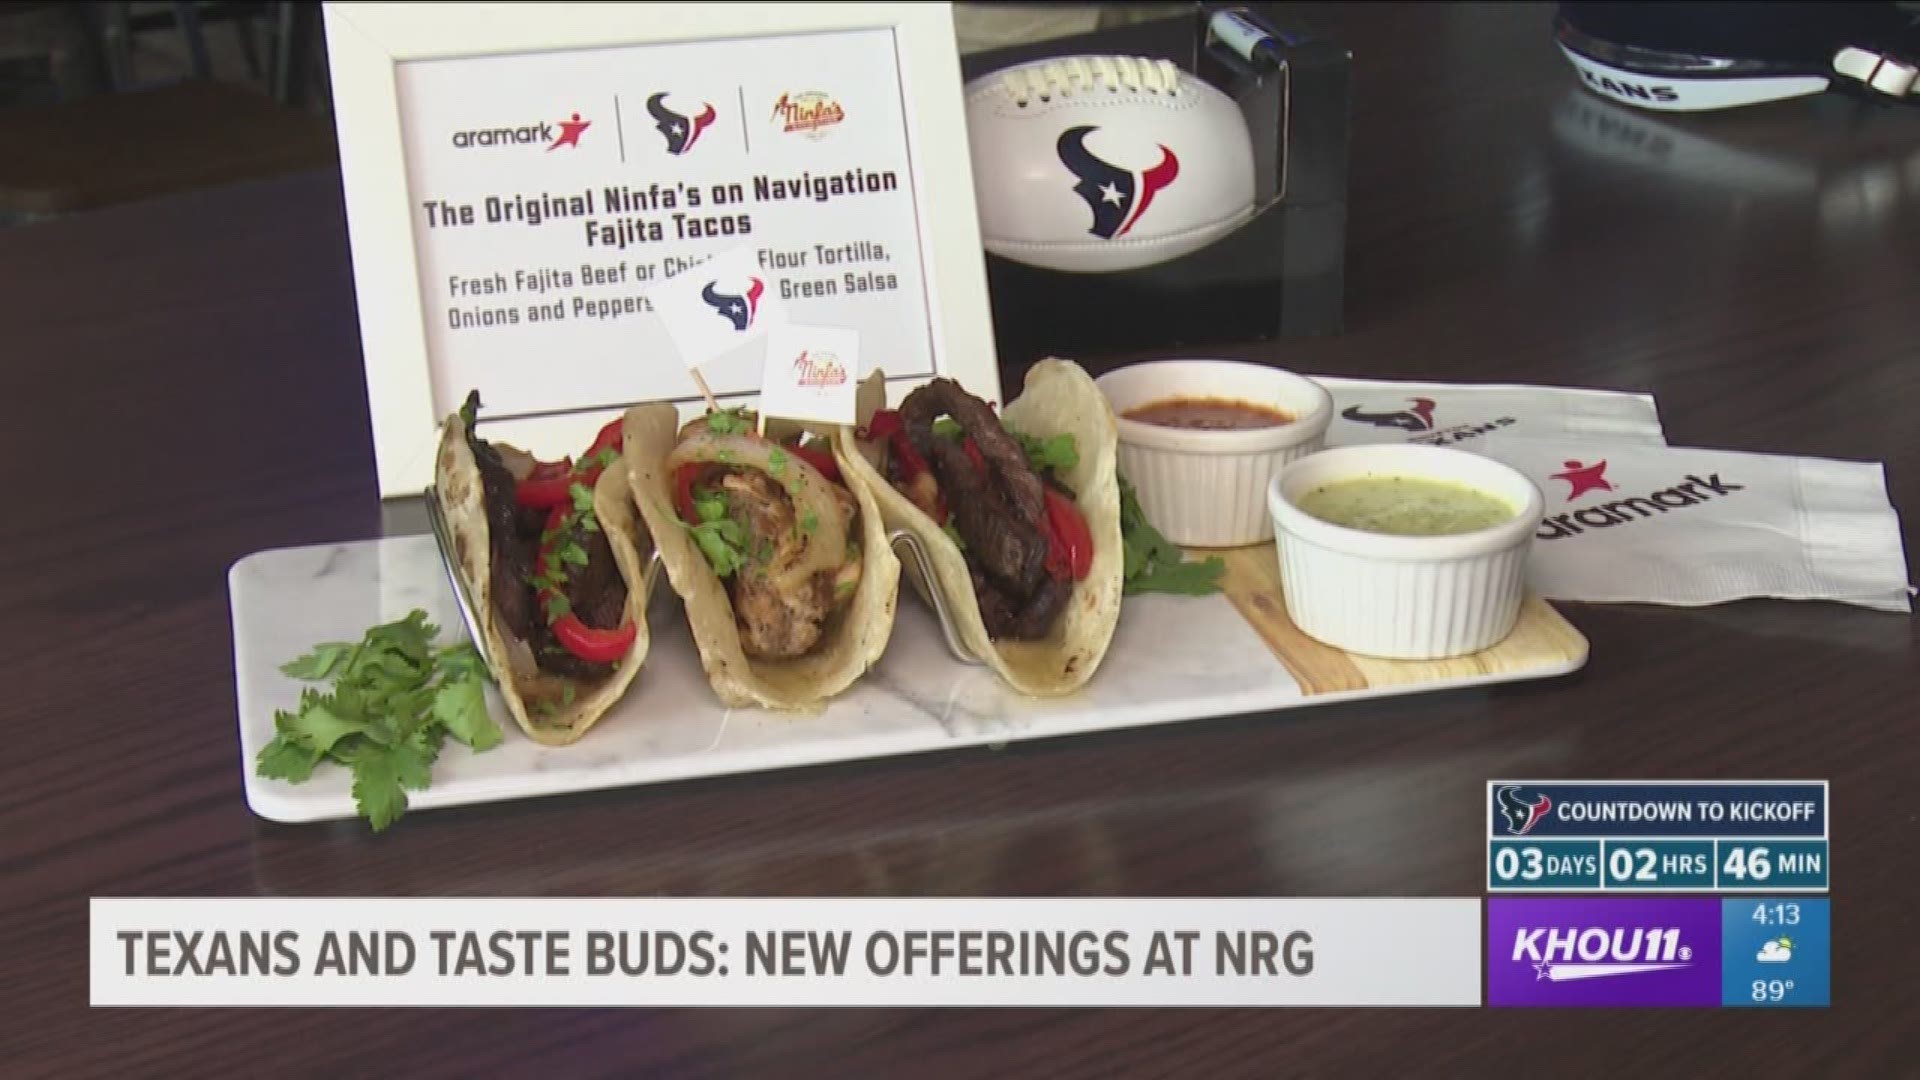 The Houston Texans have unveiled the new menu items to be served at NRG Stadium during home games this season.